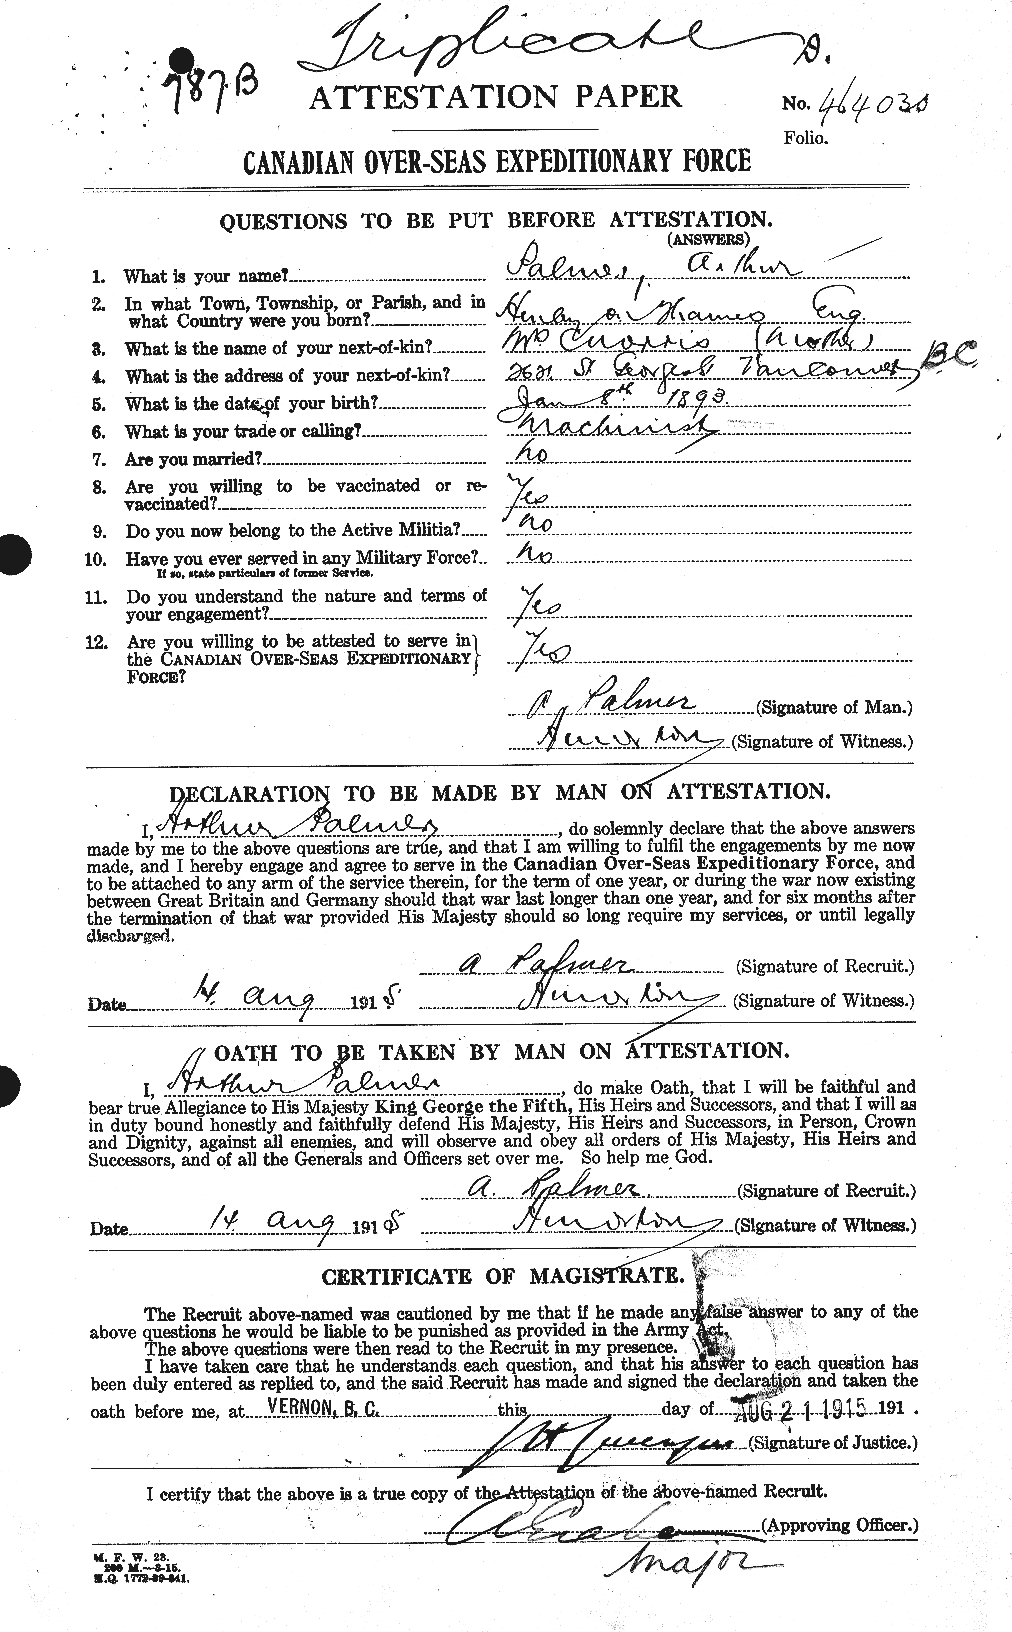 Personnel Records of the First World War - CEF 562779a